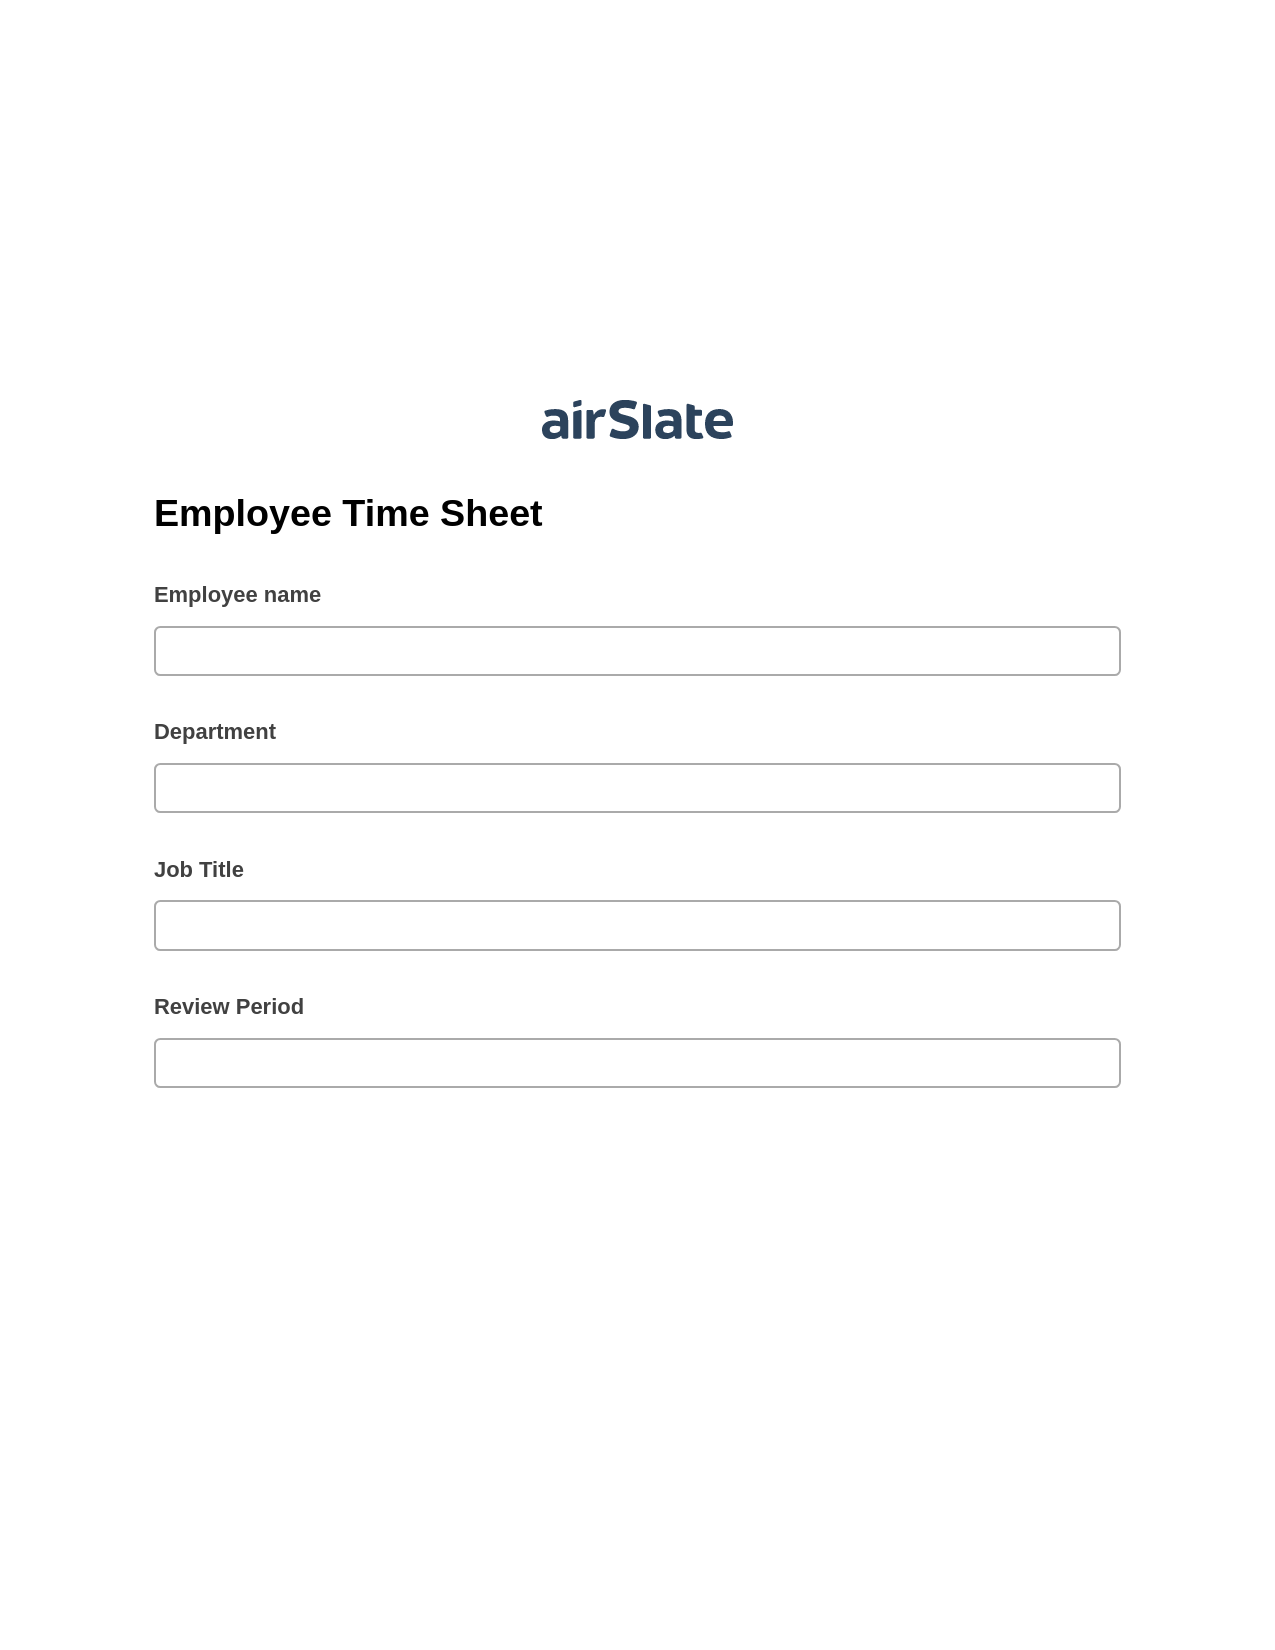 Employee Time Sheet Pre-fill Dropdowns from Google Sheet Bot, Export to MS Dynamics 365 Bot, Archive to OneDrive Bot